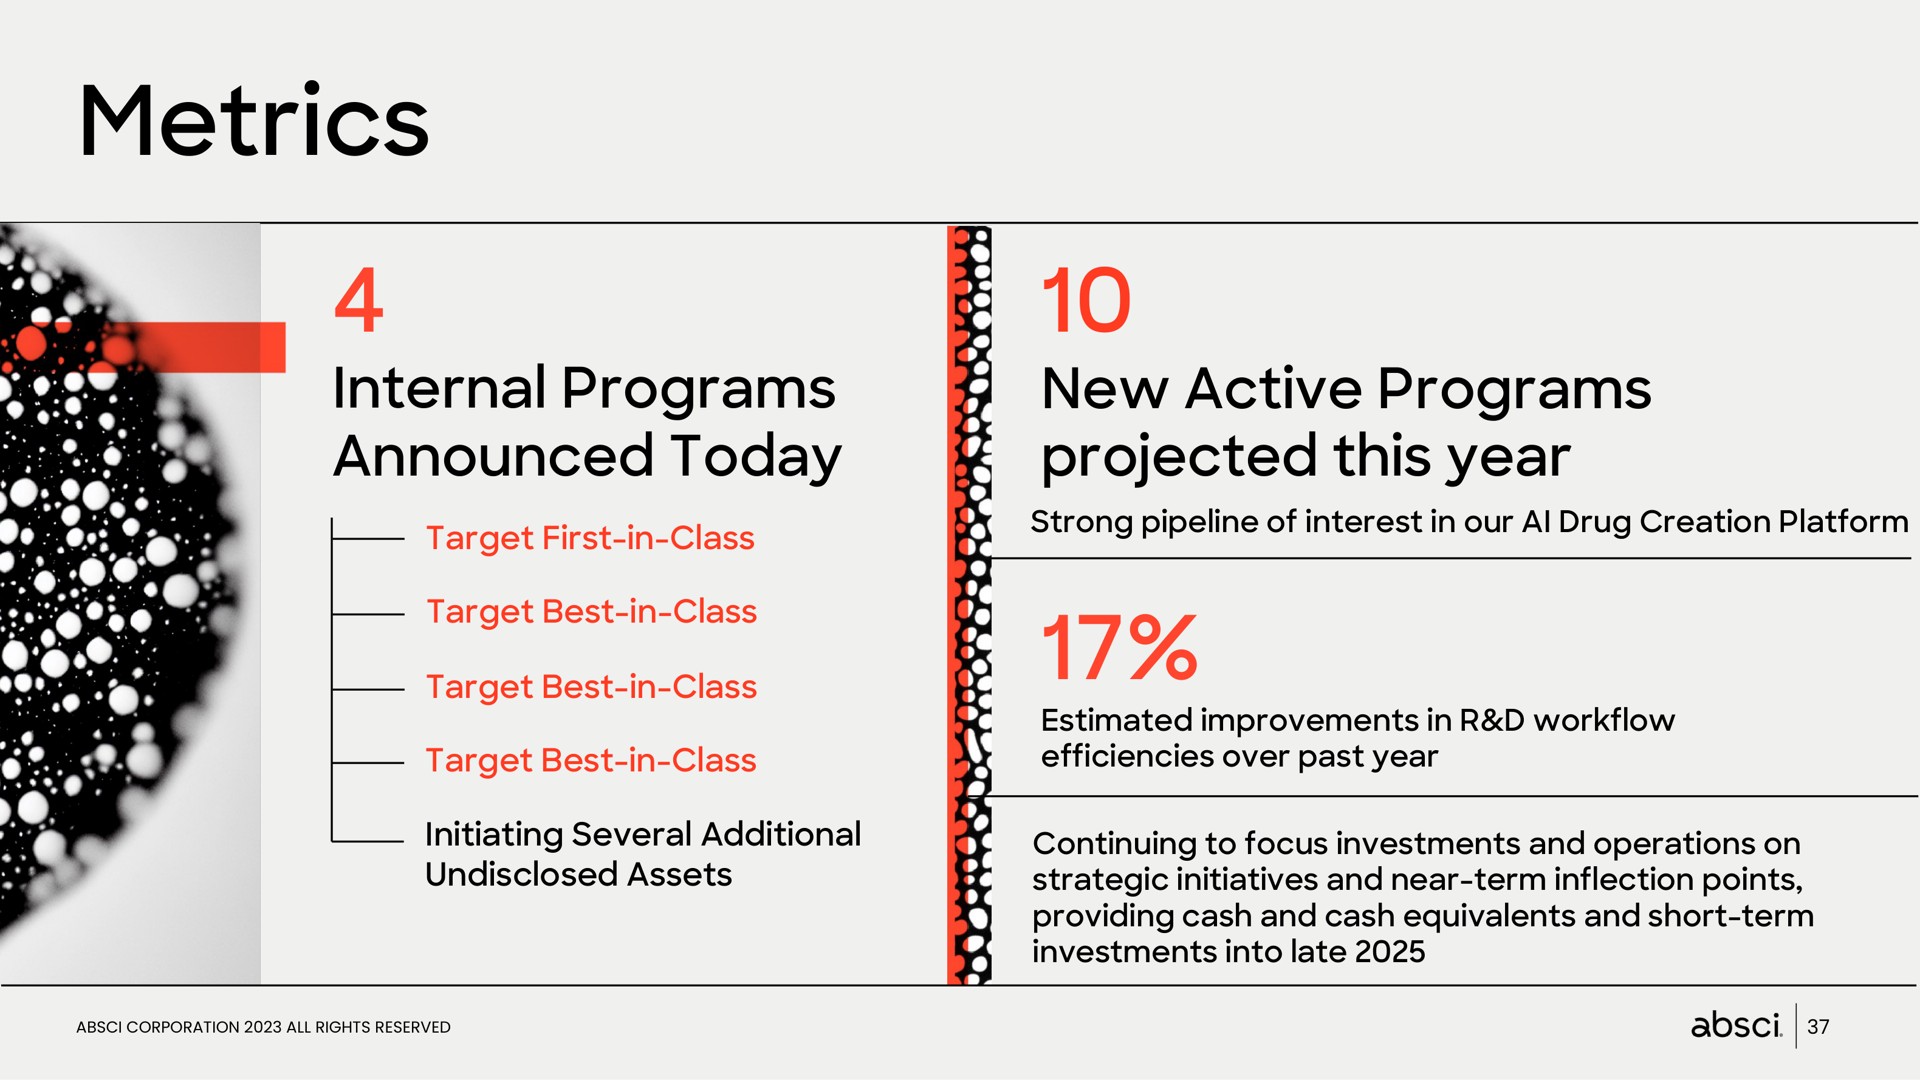 metrics a internal programs announced today new active programs projected this year | Absci